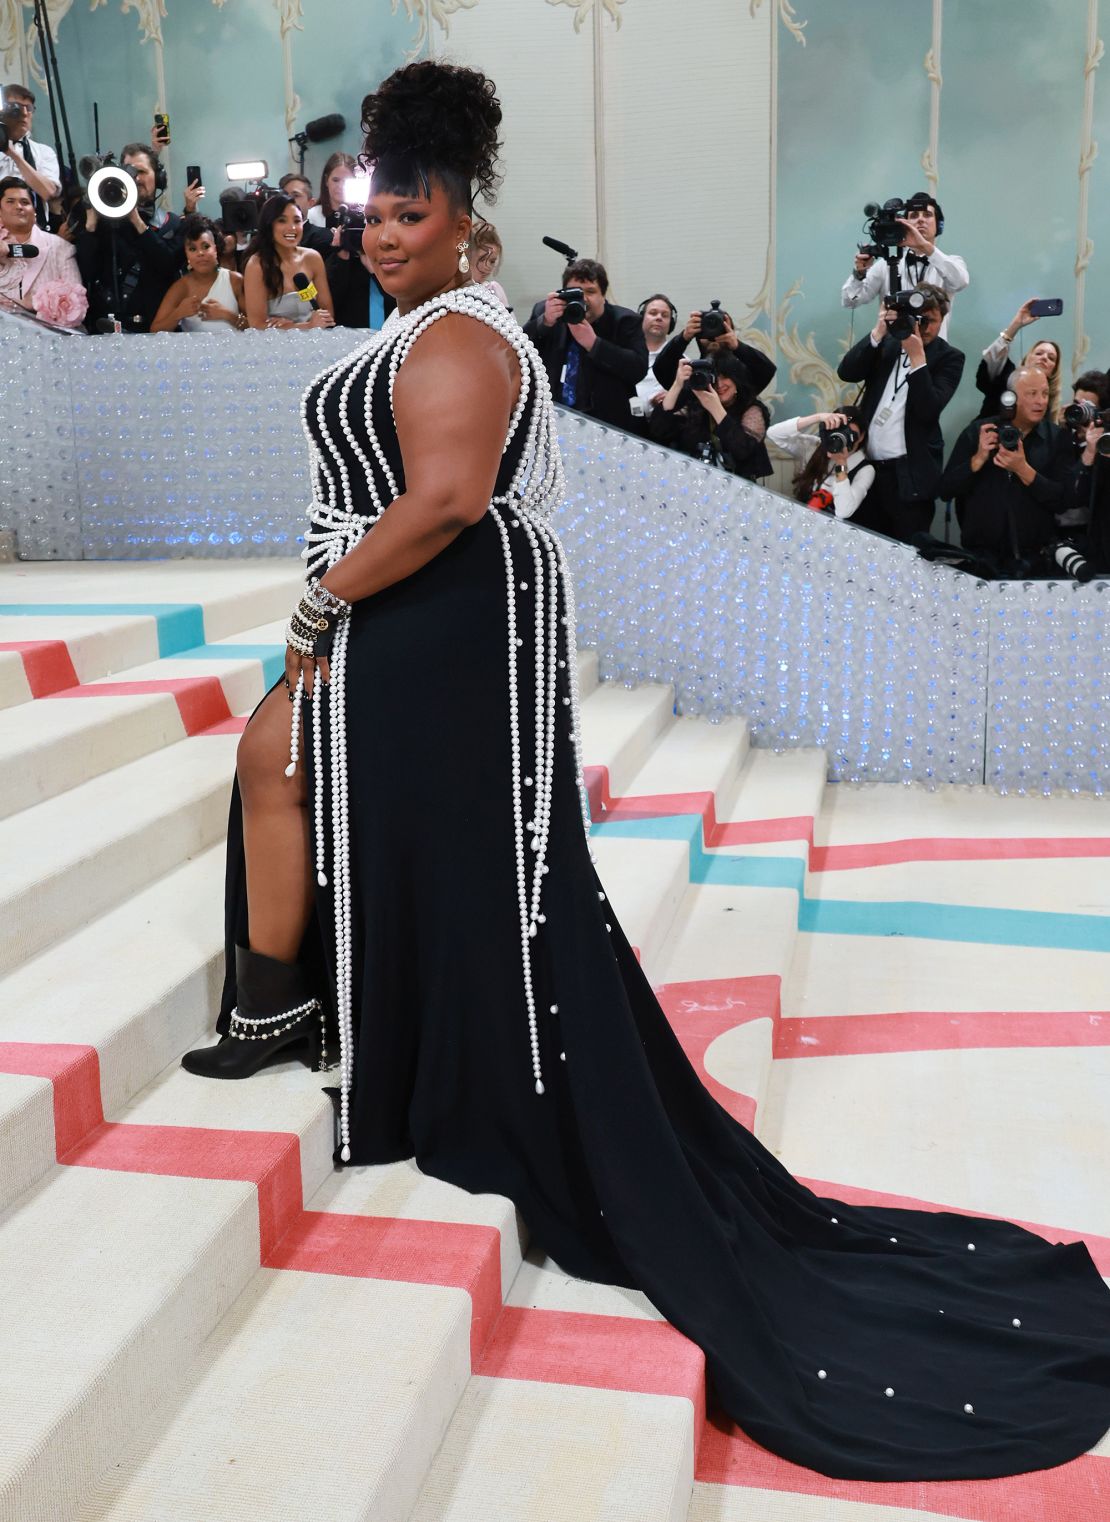 Lizzo went for a classic Chanel silhouette, custom-made by the brand.